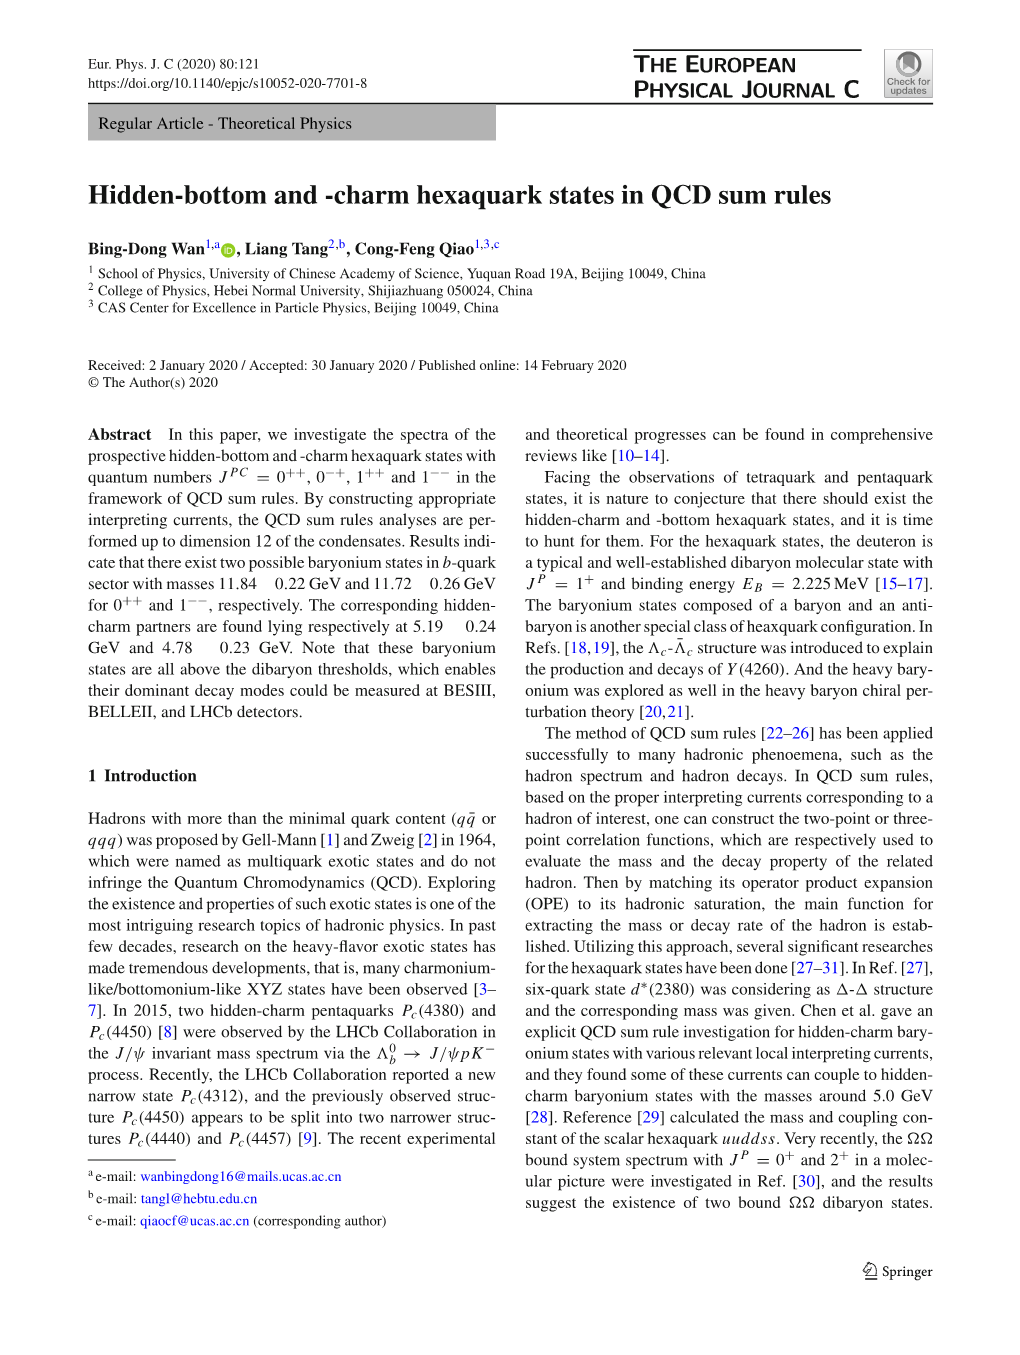 Hidden-Bottom and -Charm Hexaquark States in QCD Sum Rules